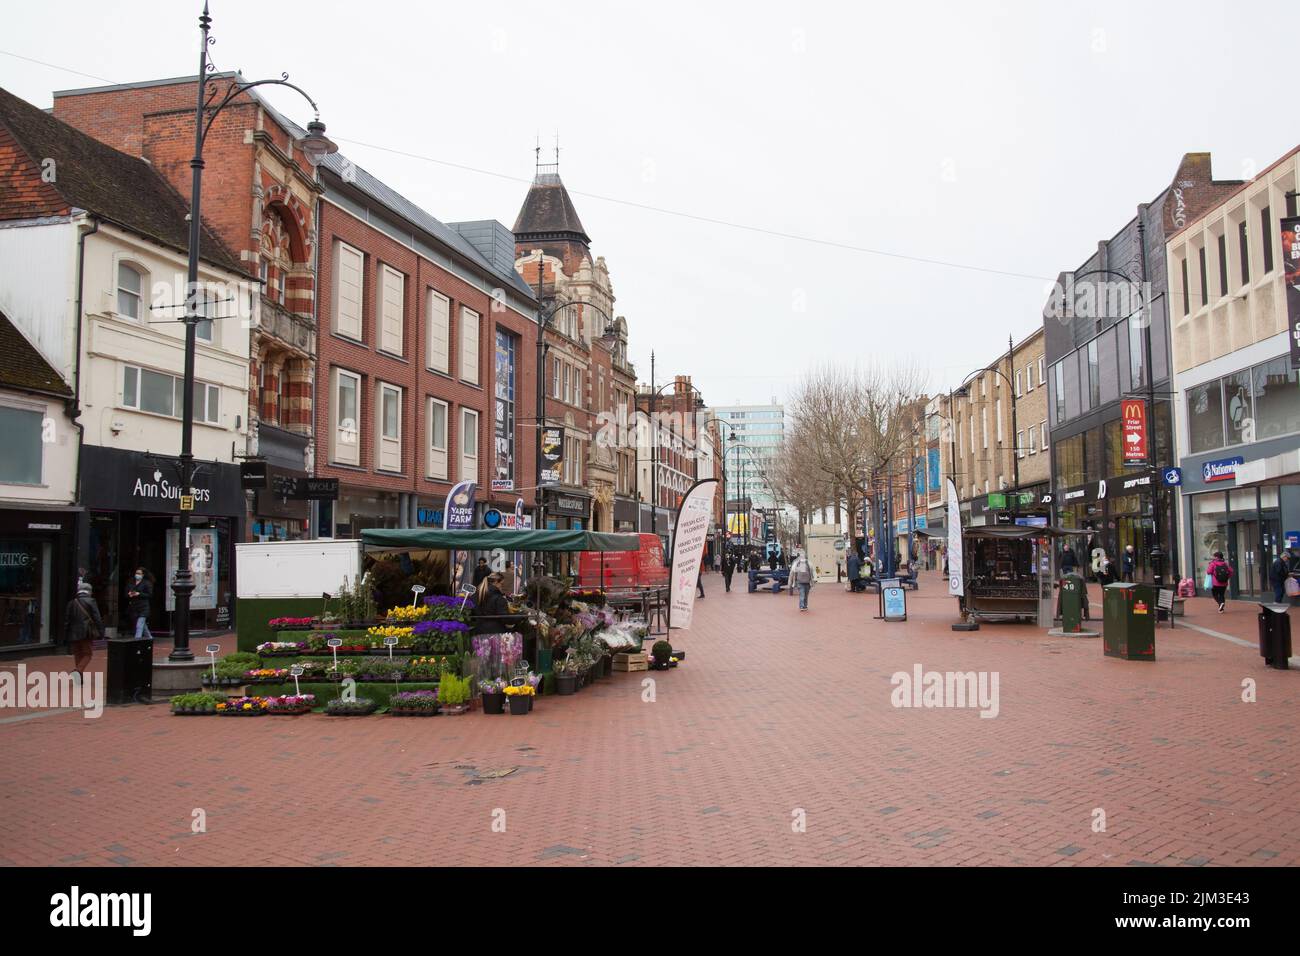 Views of Broad Street in Reading, Berkshire in the UK Stock Photo